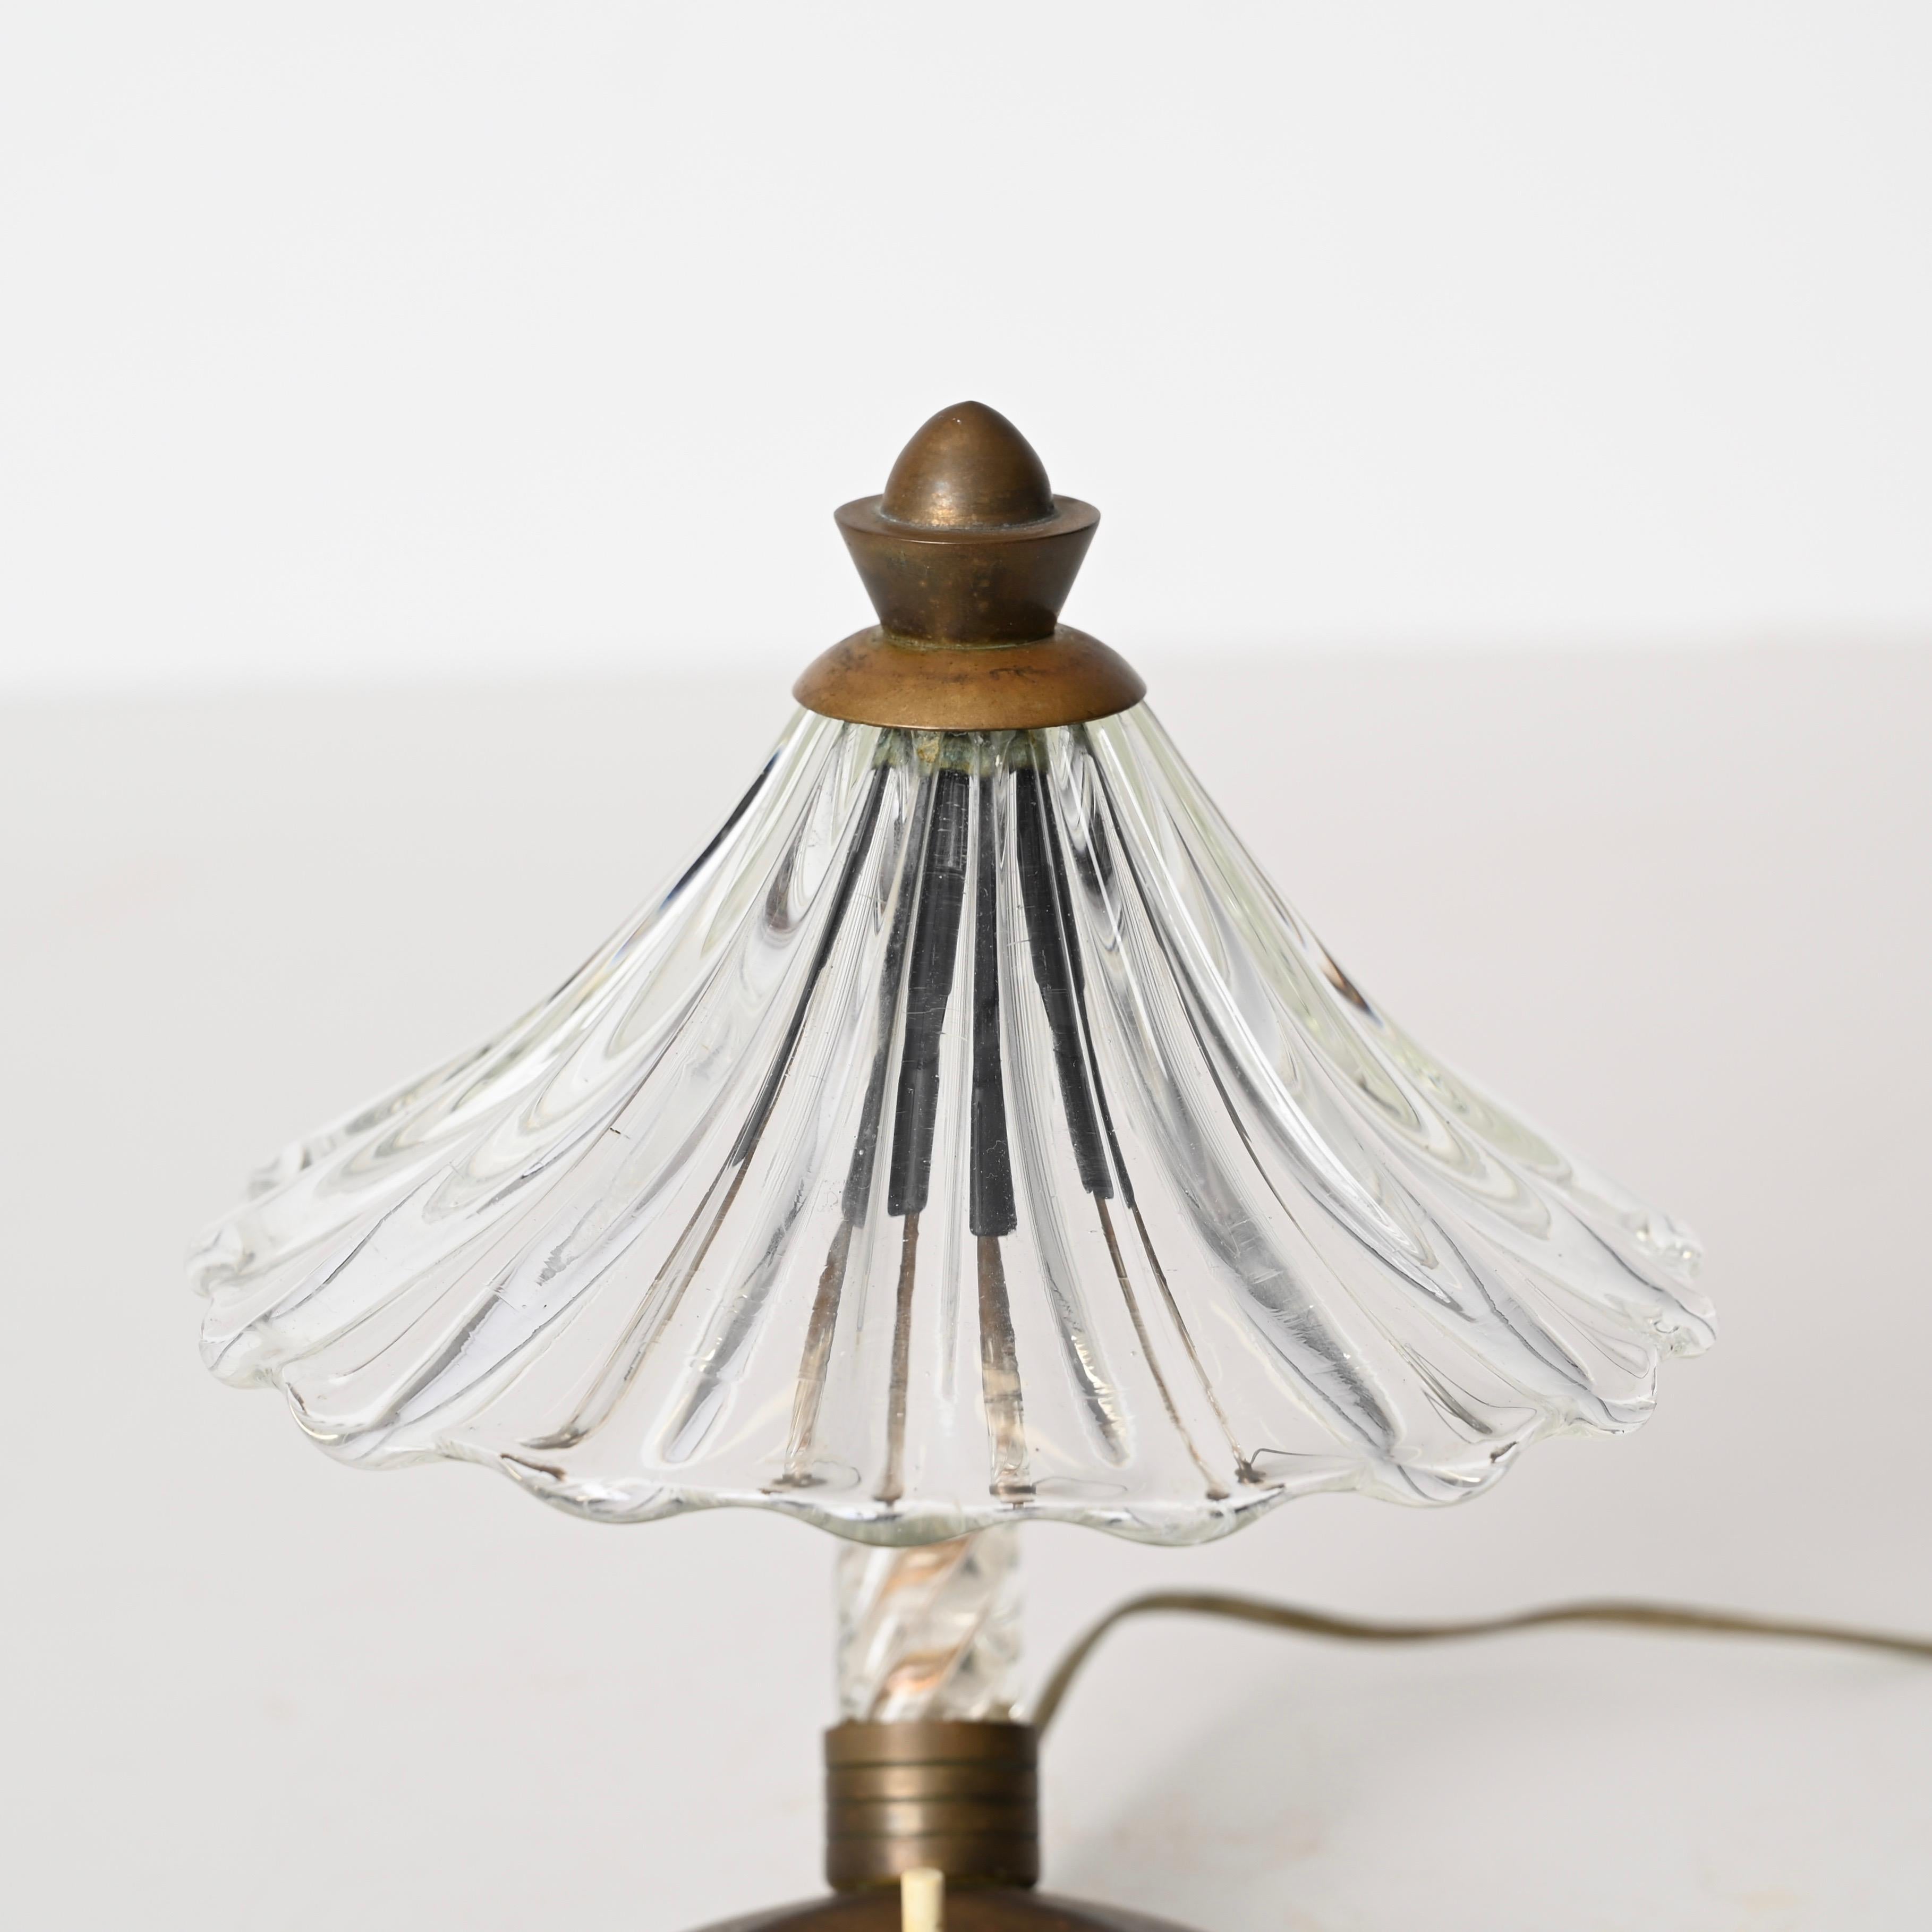 Bellflower Table Lamp in Murano Glass and Brass by Ercole Barovier, Italy 1940s For Sale 4